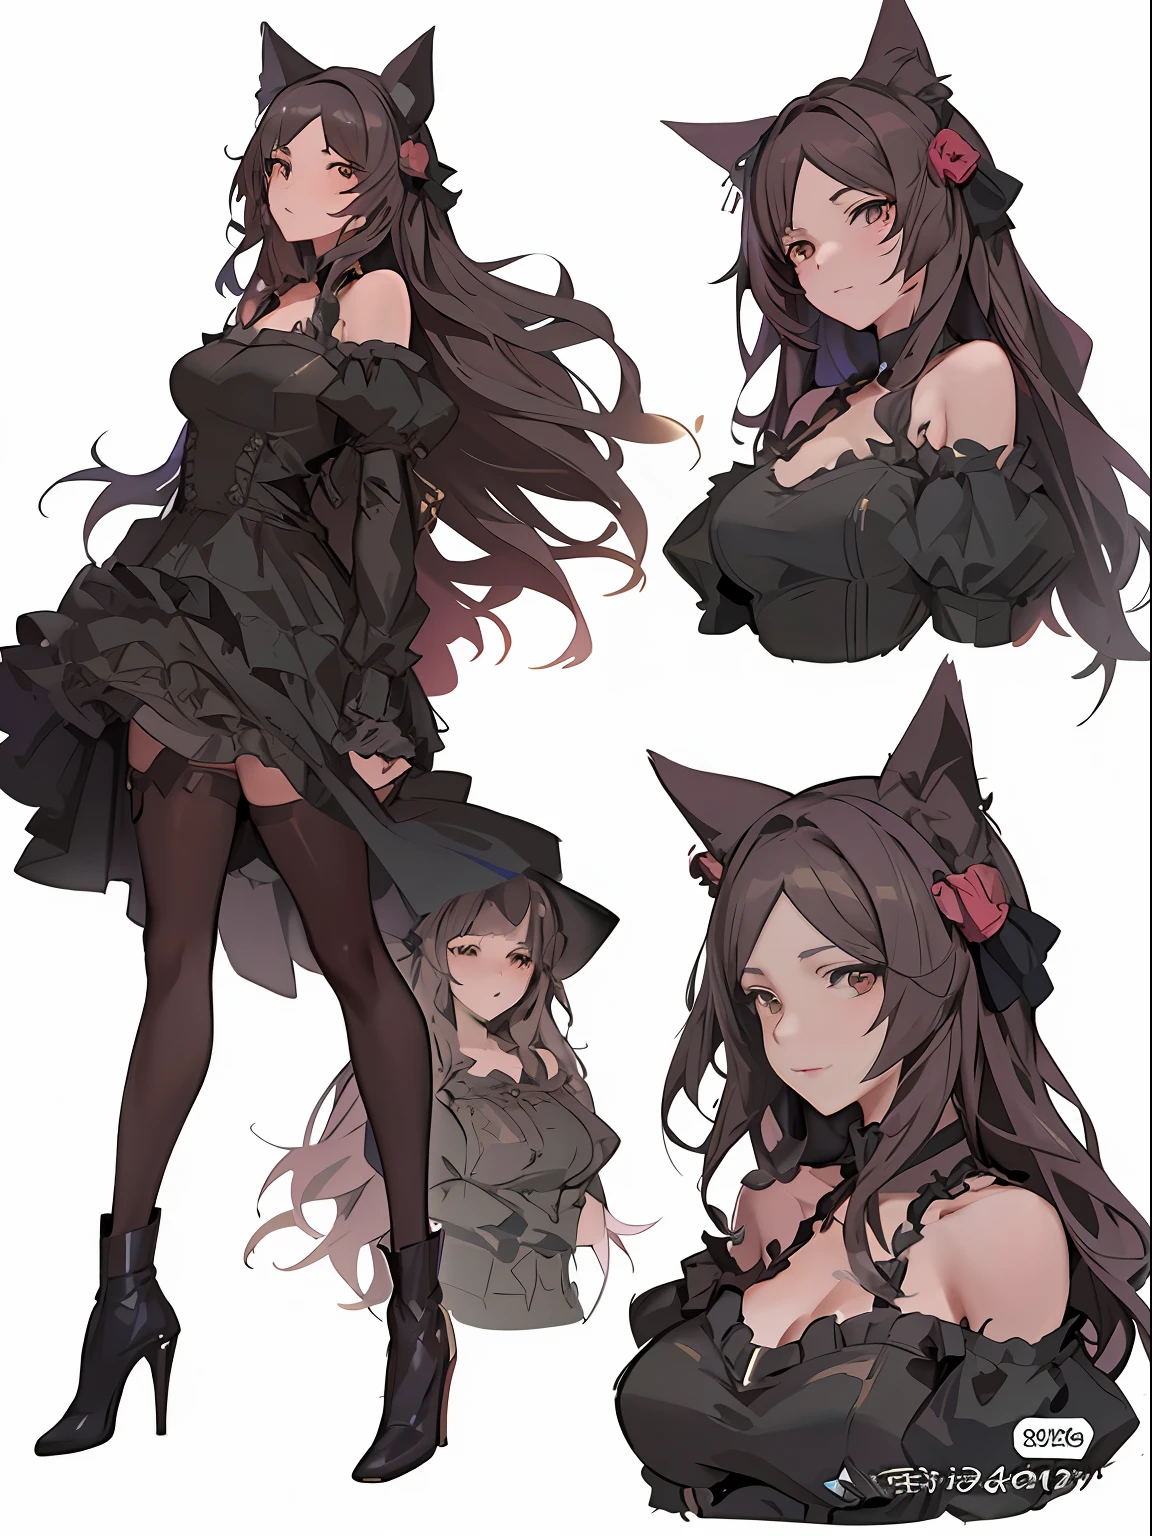 Cute Anime Cat Girl in Black Costume with Long Hair